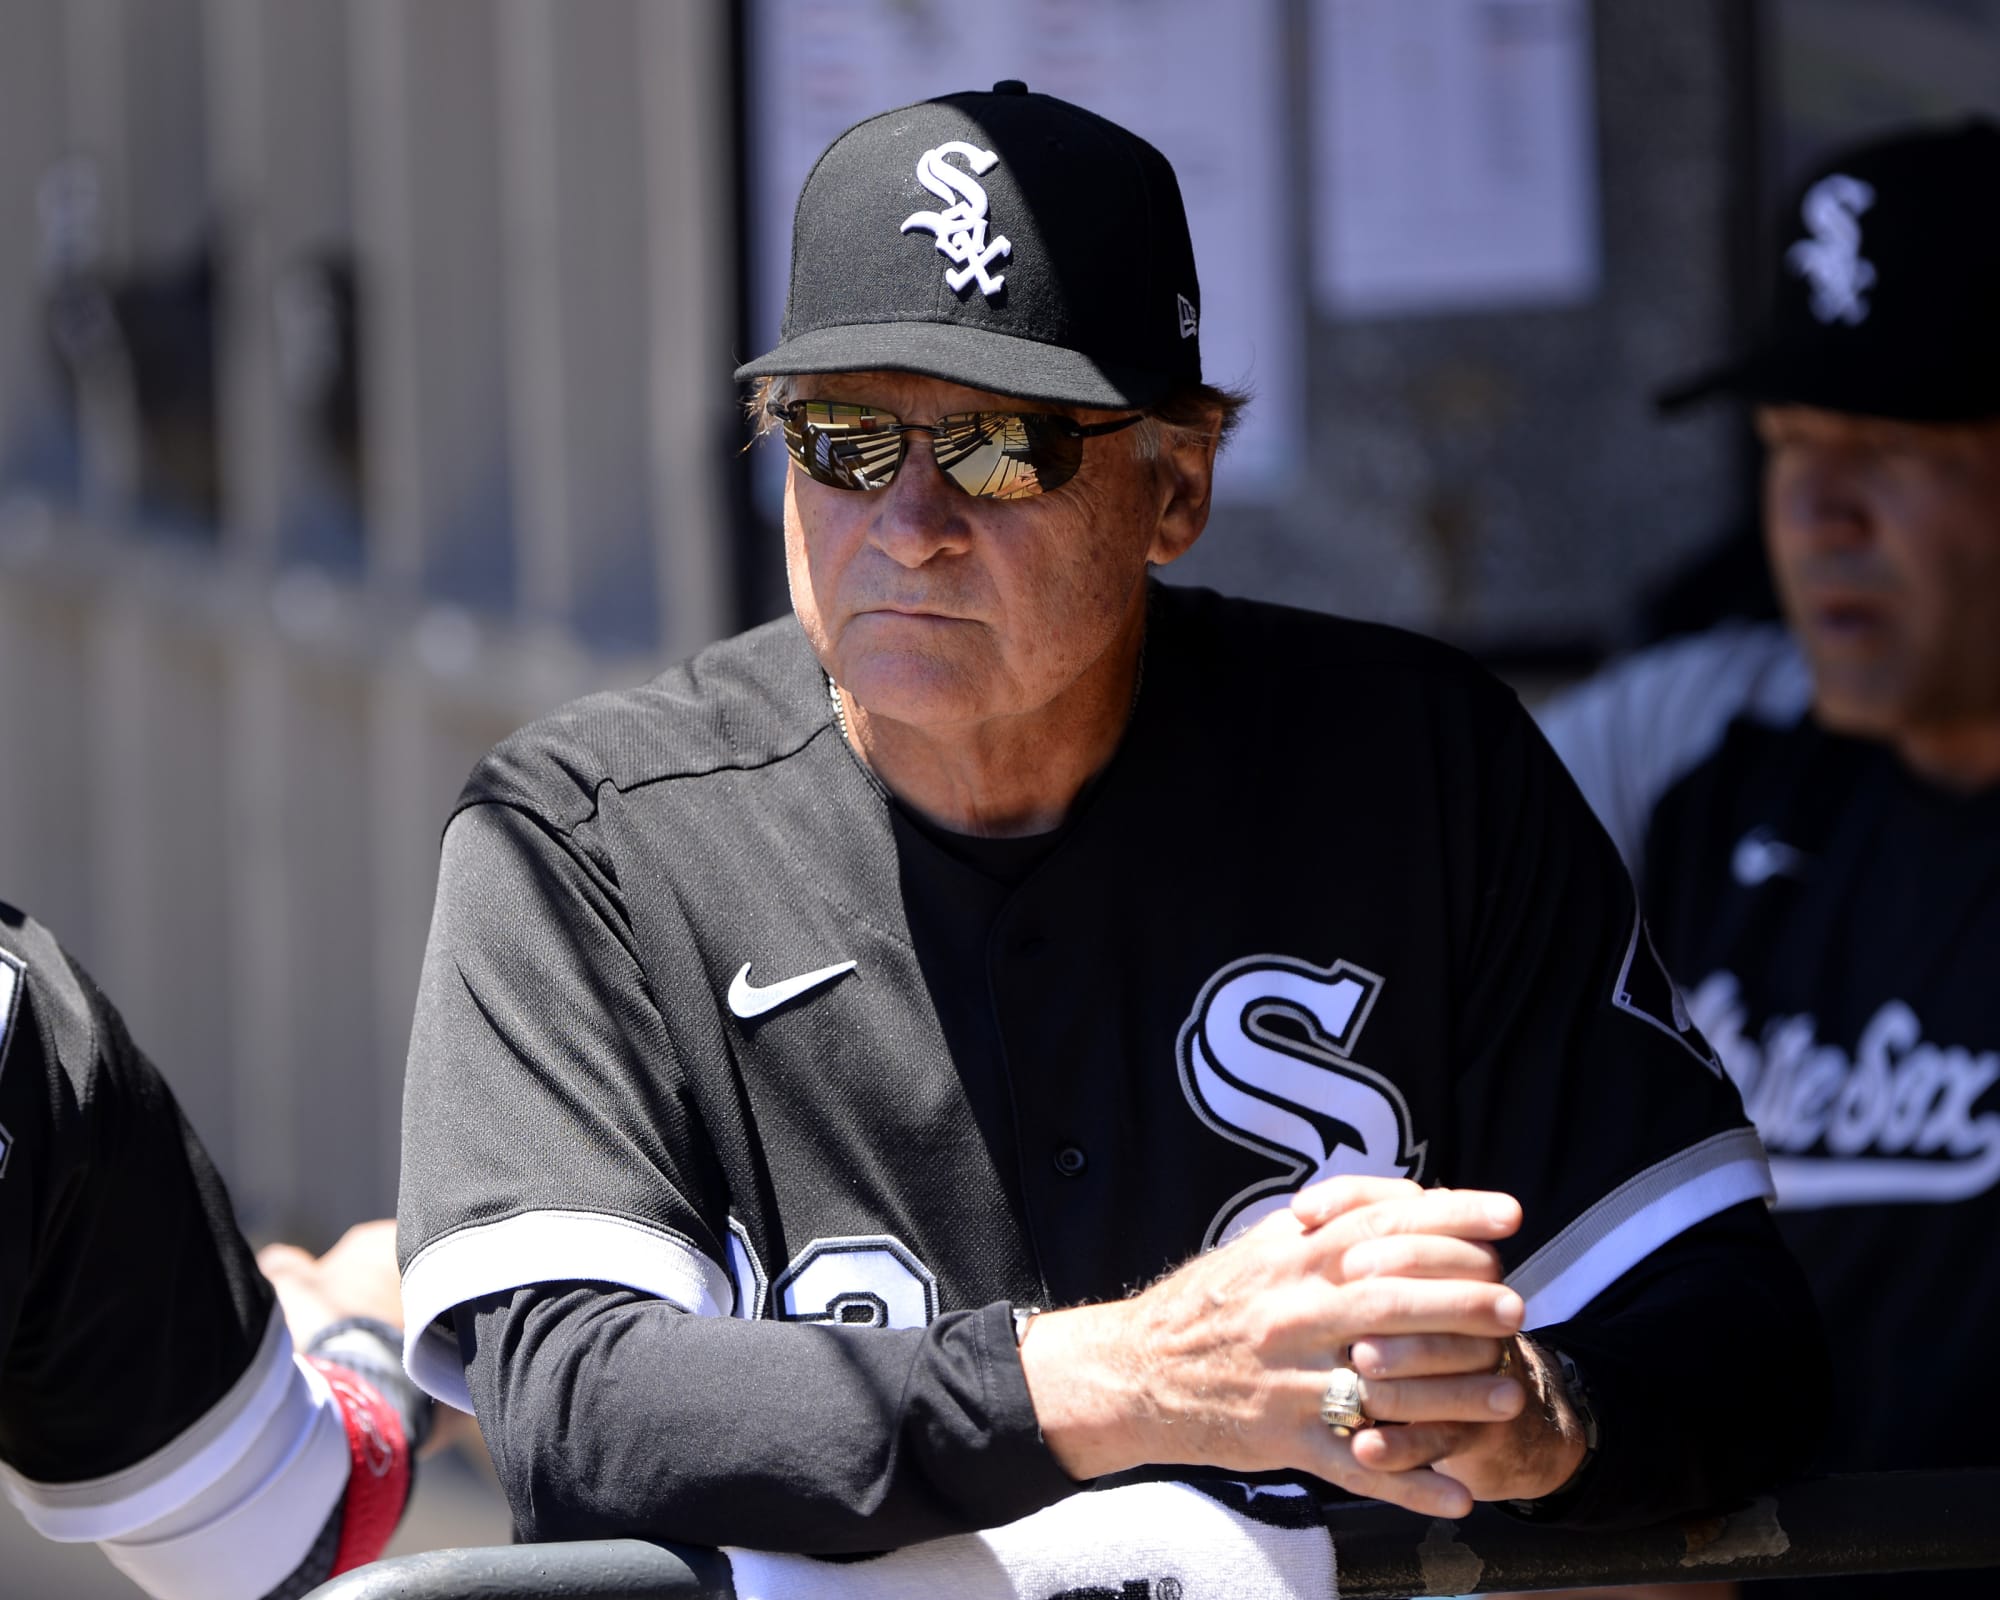 Chicago White Sox Rumors Two potential trade targets emerge Flipboard